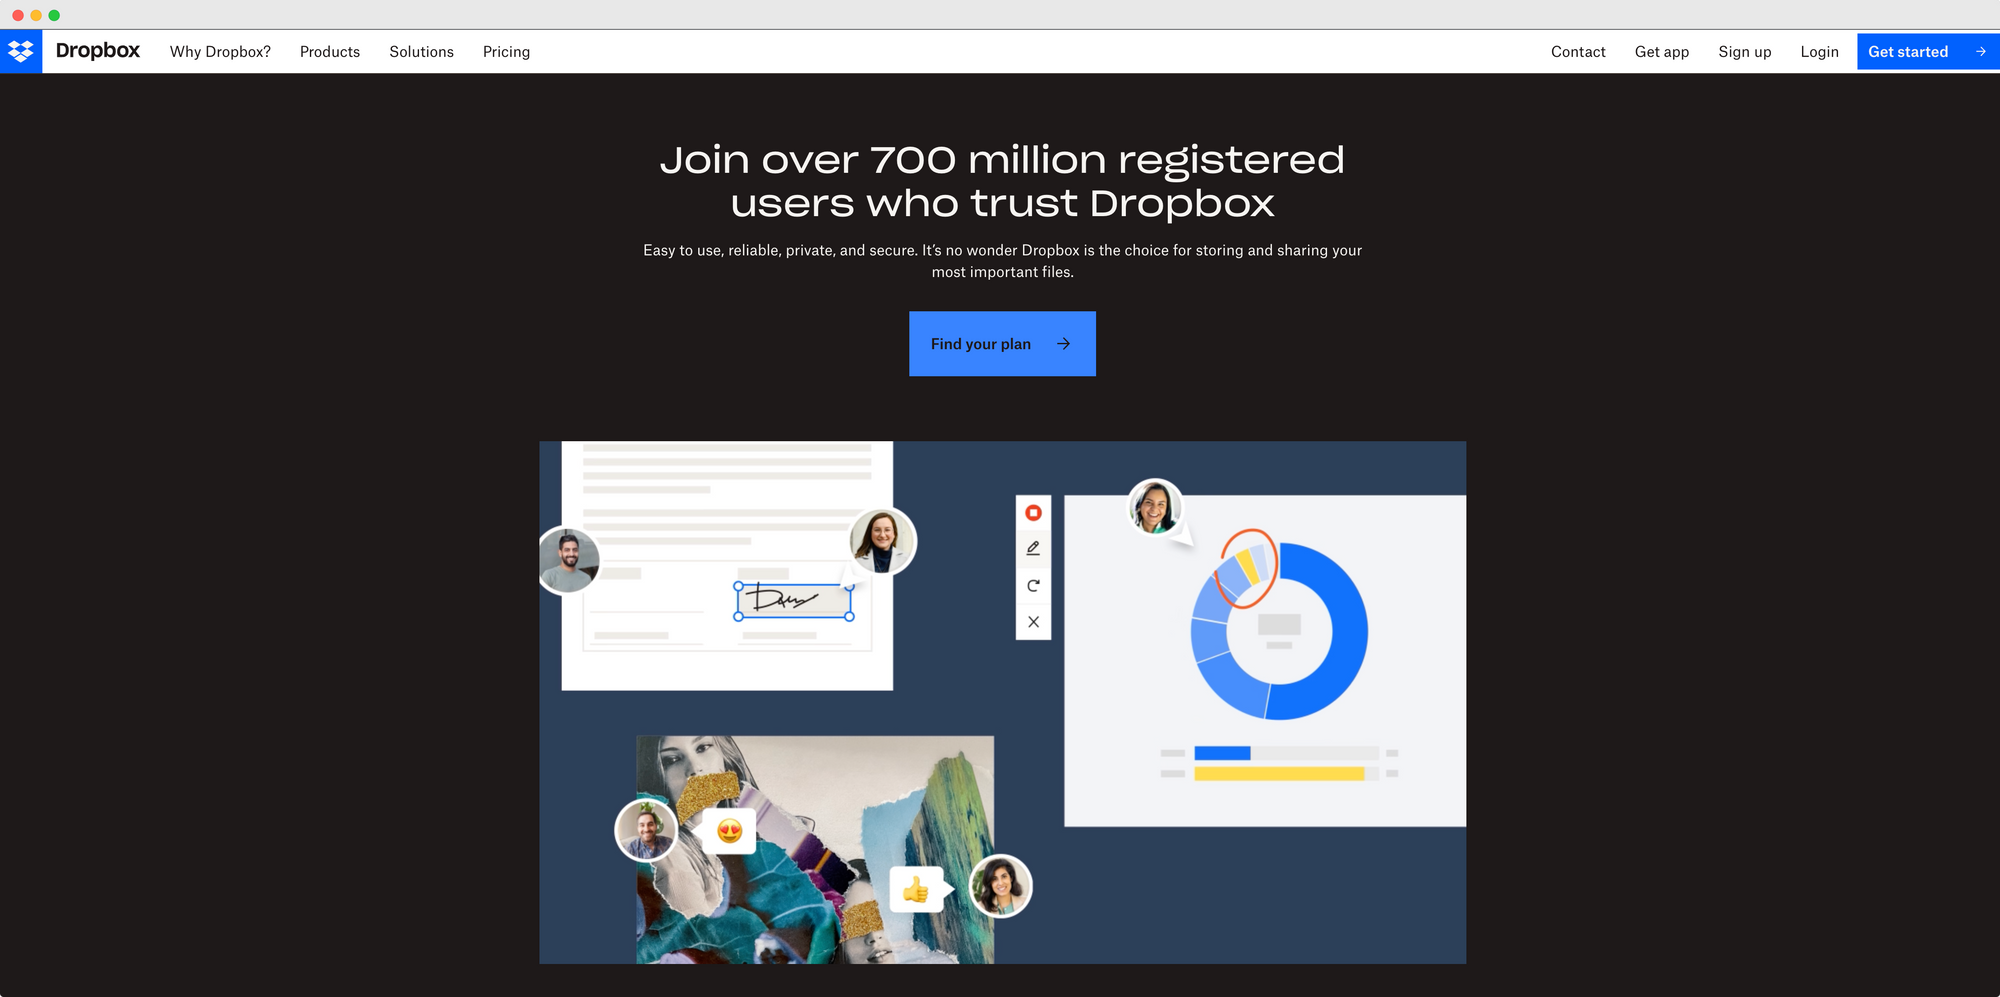 Dropbox homepage interface with user testimonials and file management graphics